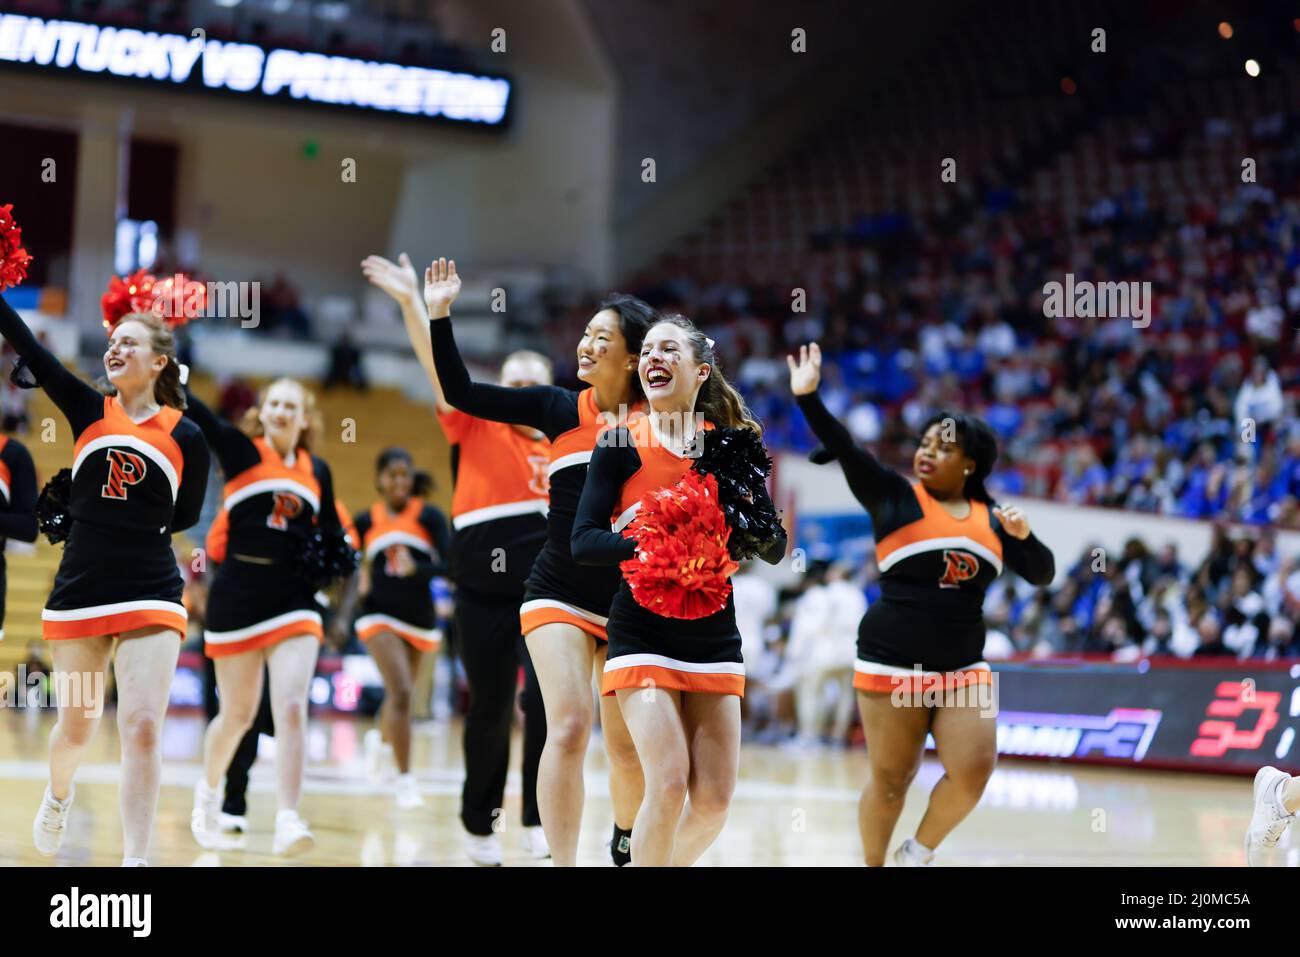 Bloomington, United States. 19th Mar, 2022. Princeton cheerleaders cheer against Kentucky during round 1 of the NCAA 2022 Division 1 Women's Basketball Championship, at Simon Skjodt Assembly Hall in Bloomington. Princeton beat Kentucky 69-62. Credit: SOPA Images Limited/Alamy Live News Stock Photo